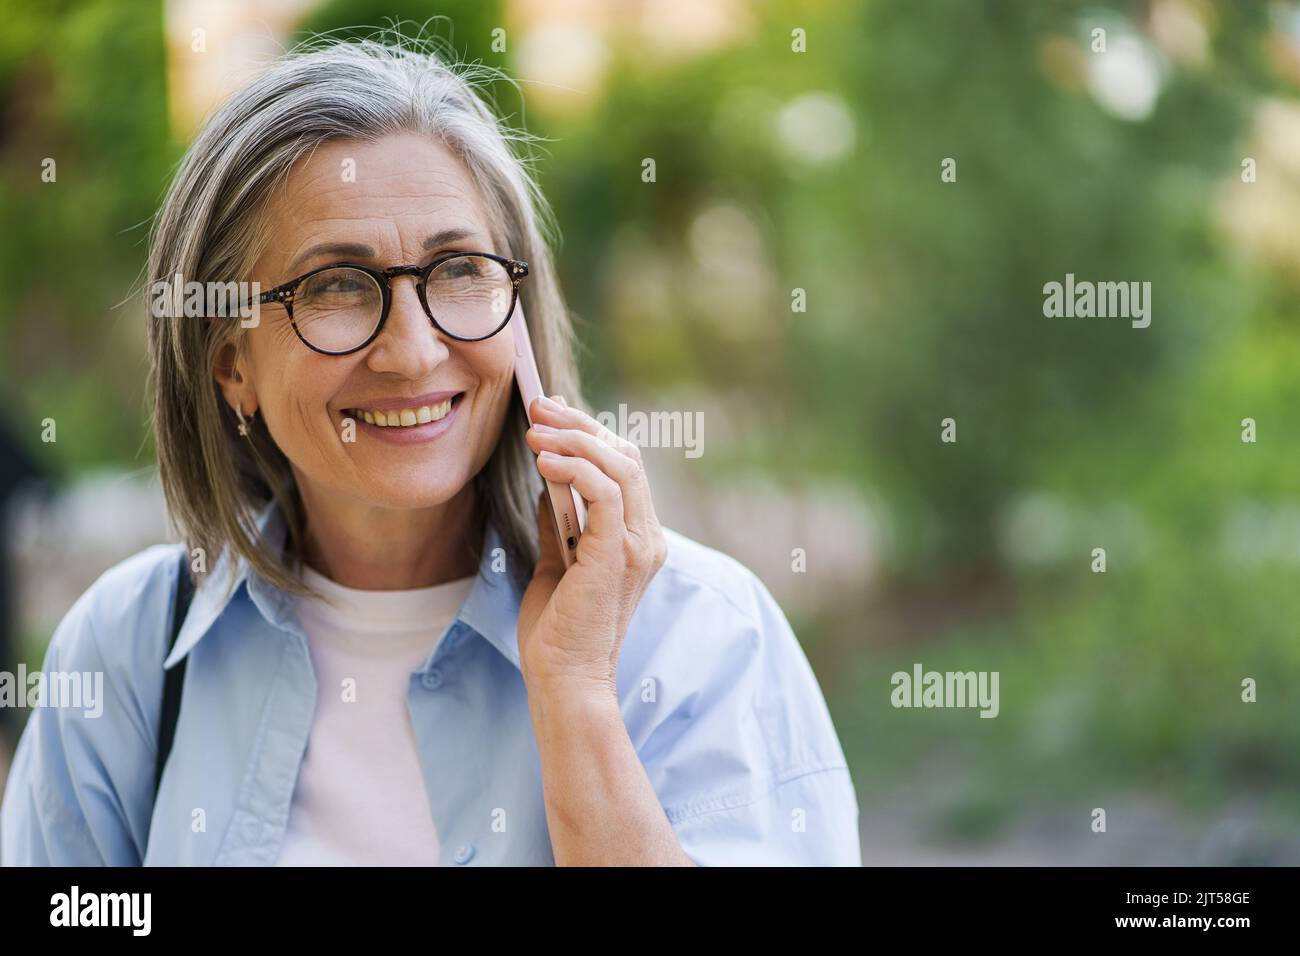 Senior grey hair woman in eye glasses smiling talking on the phone standing outdoors garden or park background wearing blue shirt. Silver hair woman outdoors.  Stock Photo